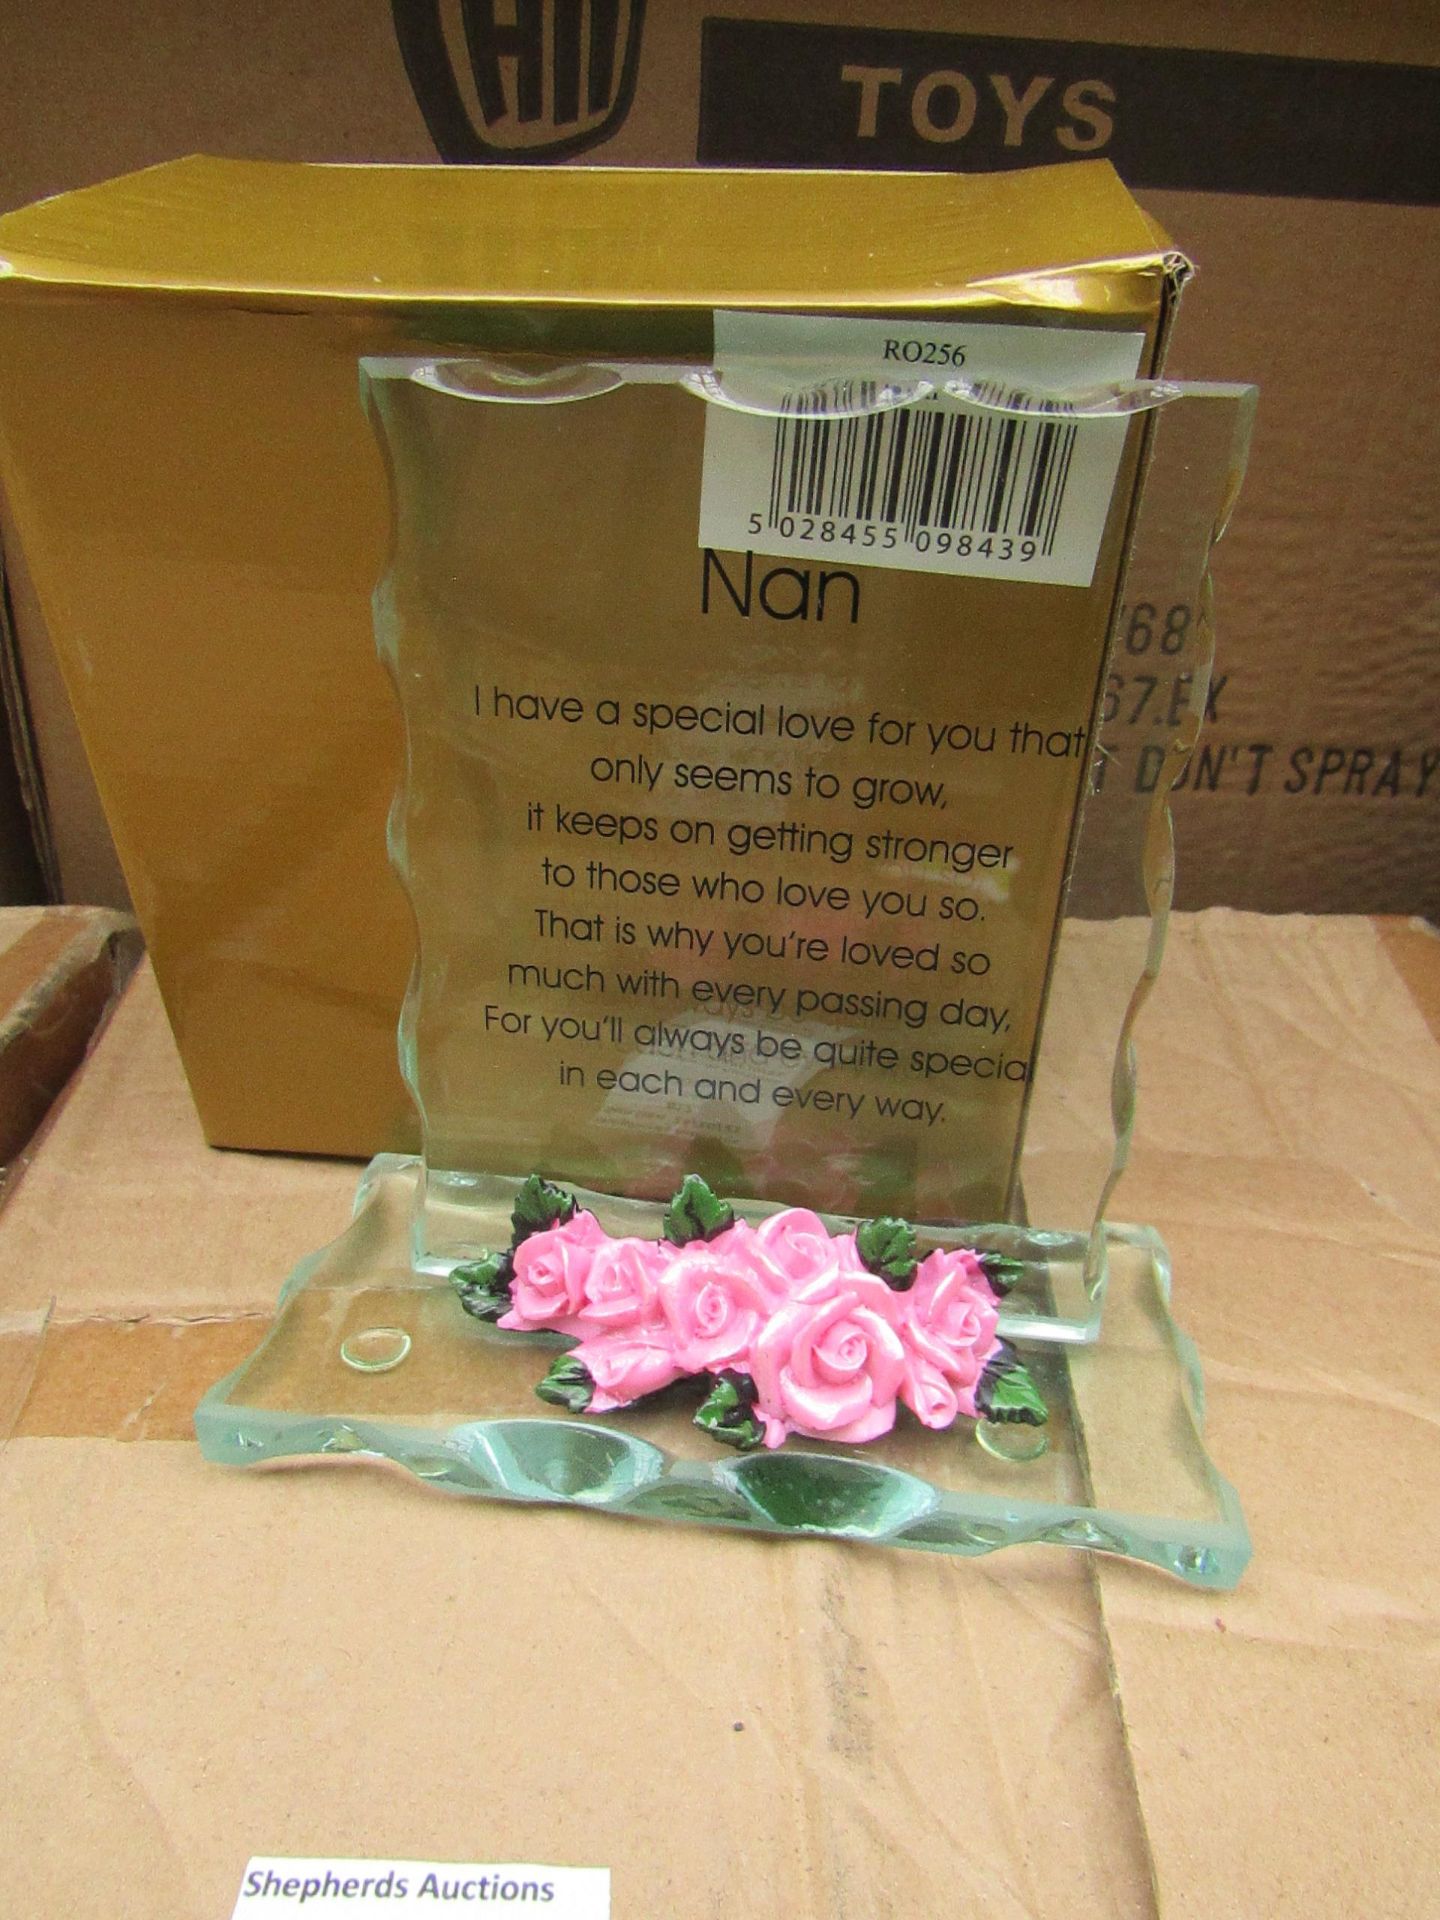 1x The mavflower glass collection - glass nan gift - see image for design - new & boxed.